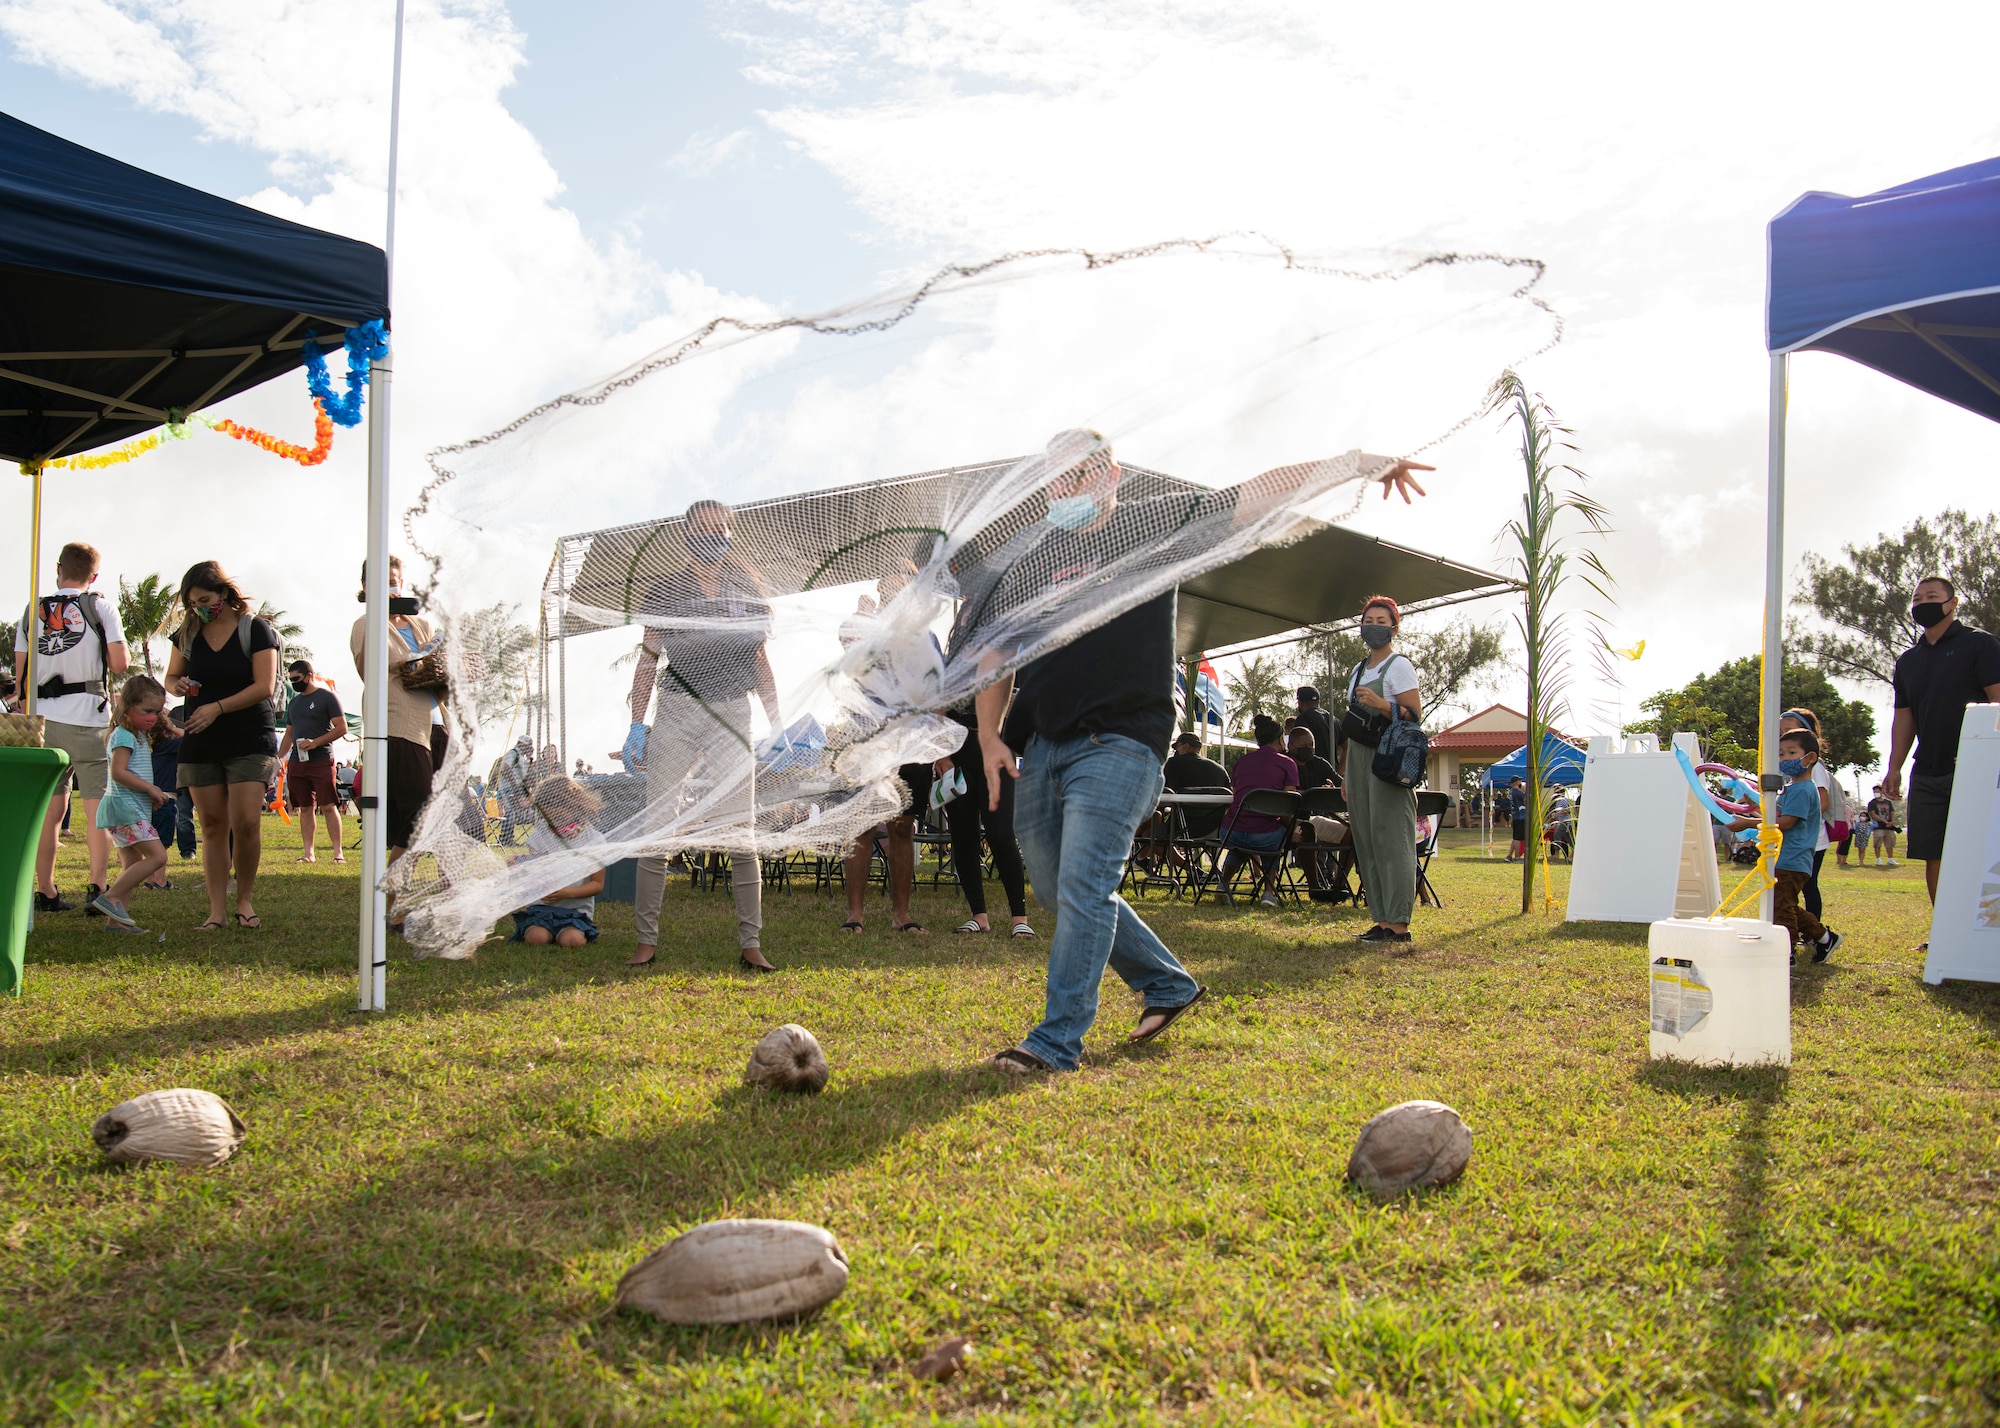 A participant throws a cast net over coconuts during the Tåotåo Guåhan event at Arc Light Memorial Park at Andersen Air Force Base, Guam, March 13, 2021. In honor of CHamoru Month, the Andersen AFB community hosted an event to celebrate the island’s indigenous culture and heritage with members of the base and local residents in attendance. (U.S. Air Force photo by Senior Airman Aubree Owens)